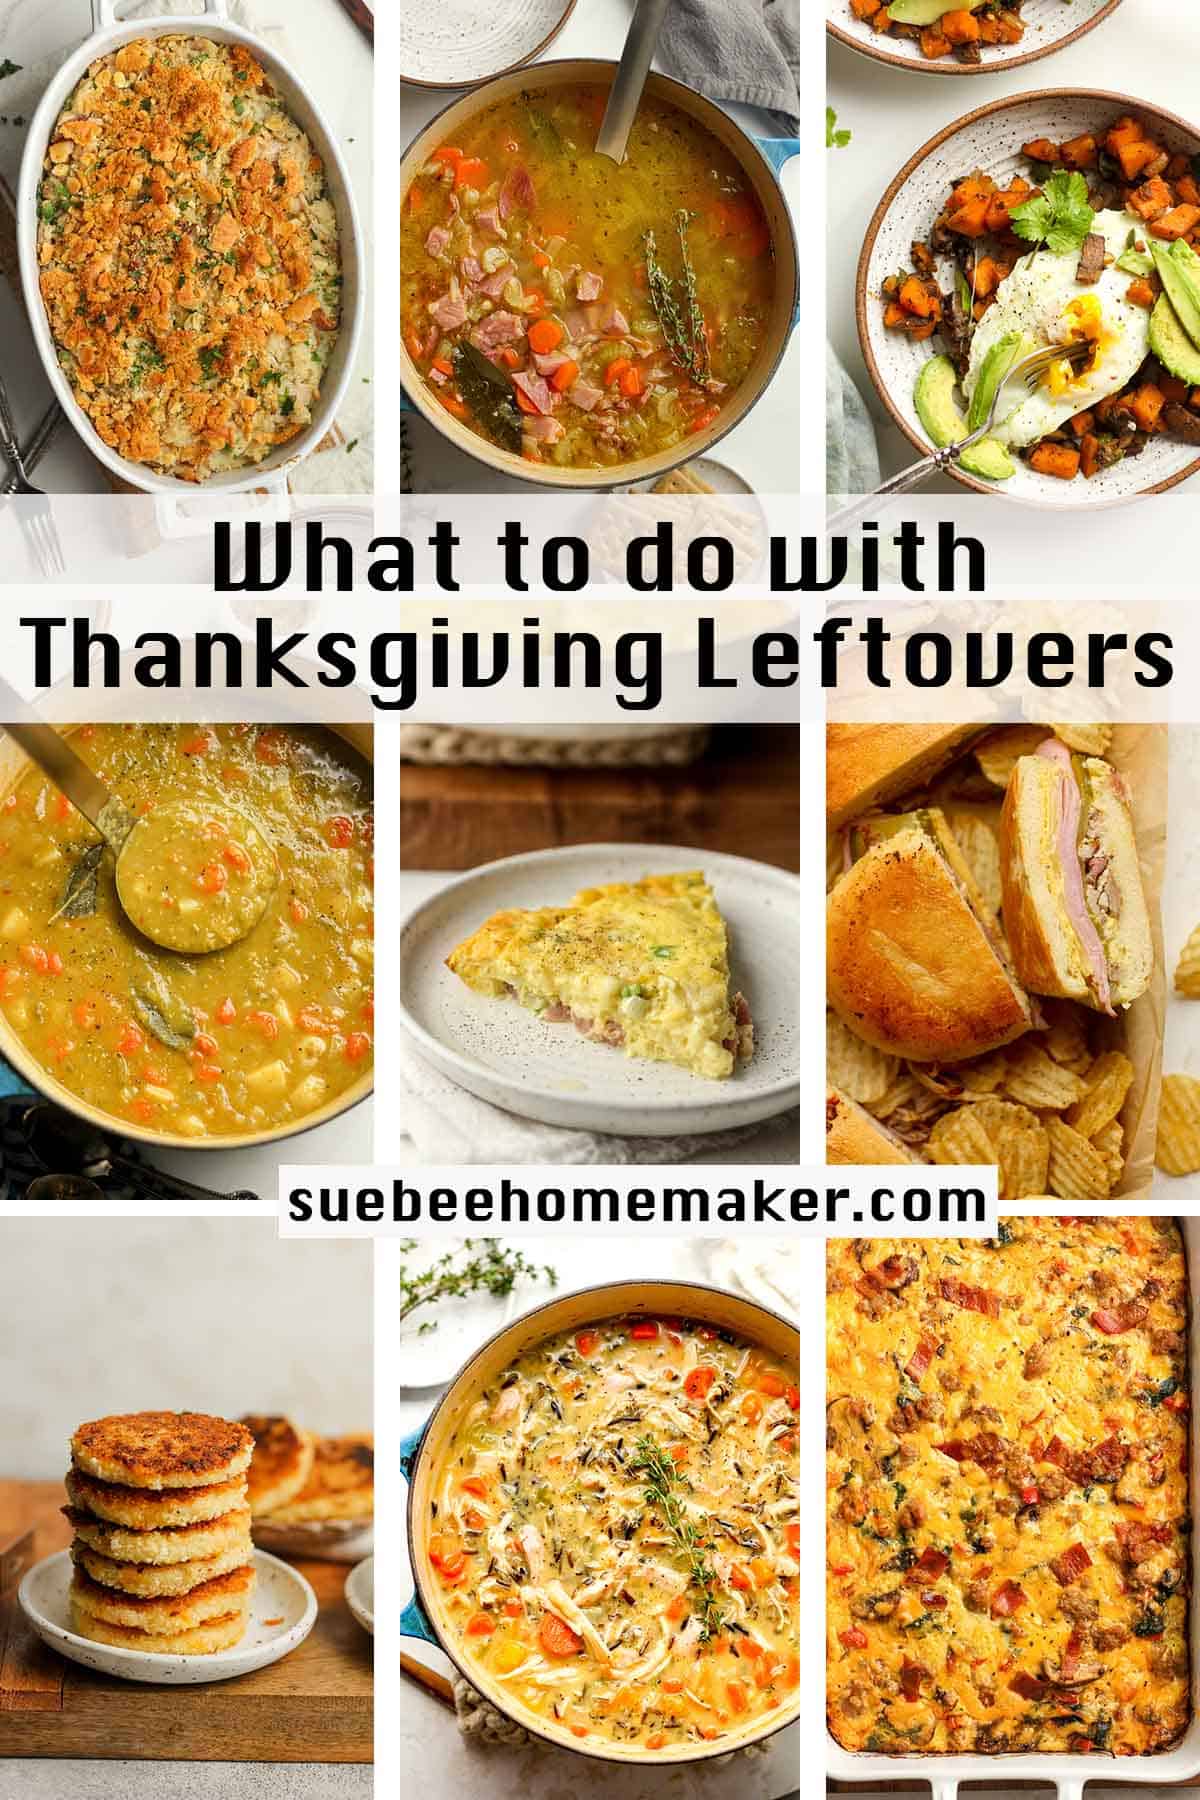 A roundup of nine recipes to make with Thanksgiving leftovers.